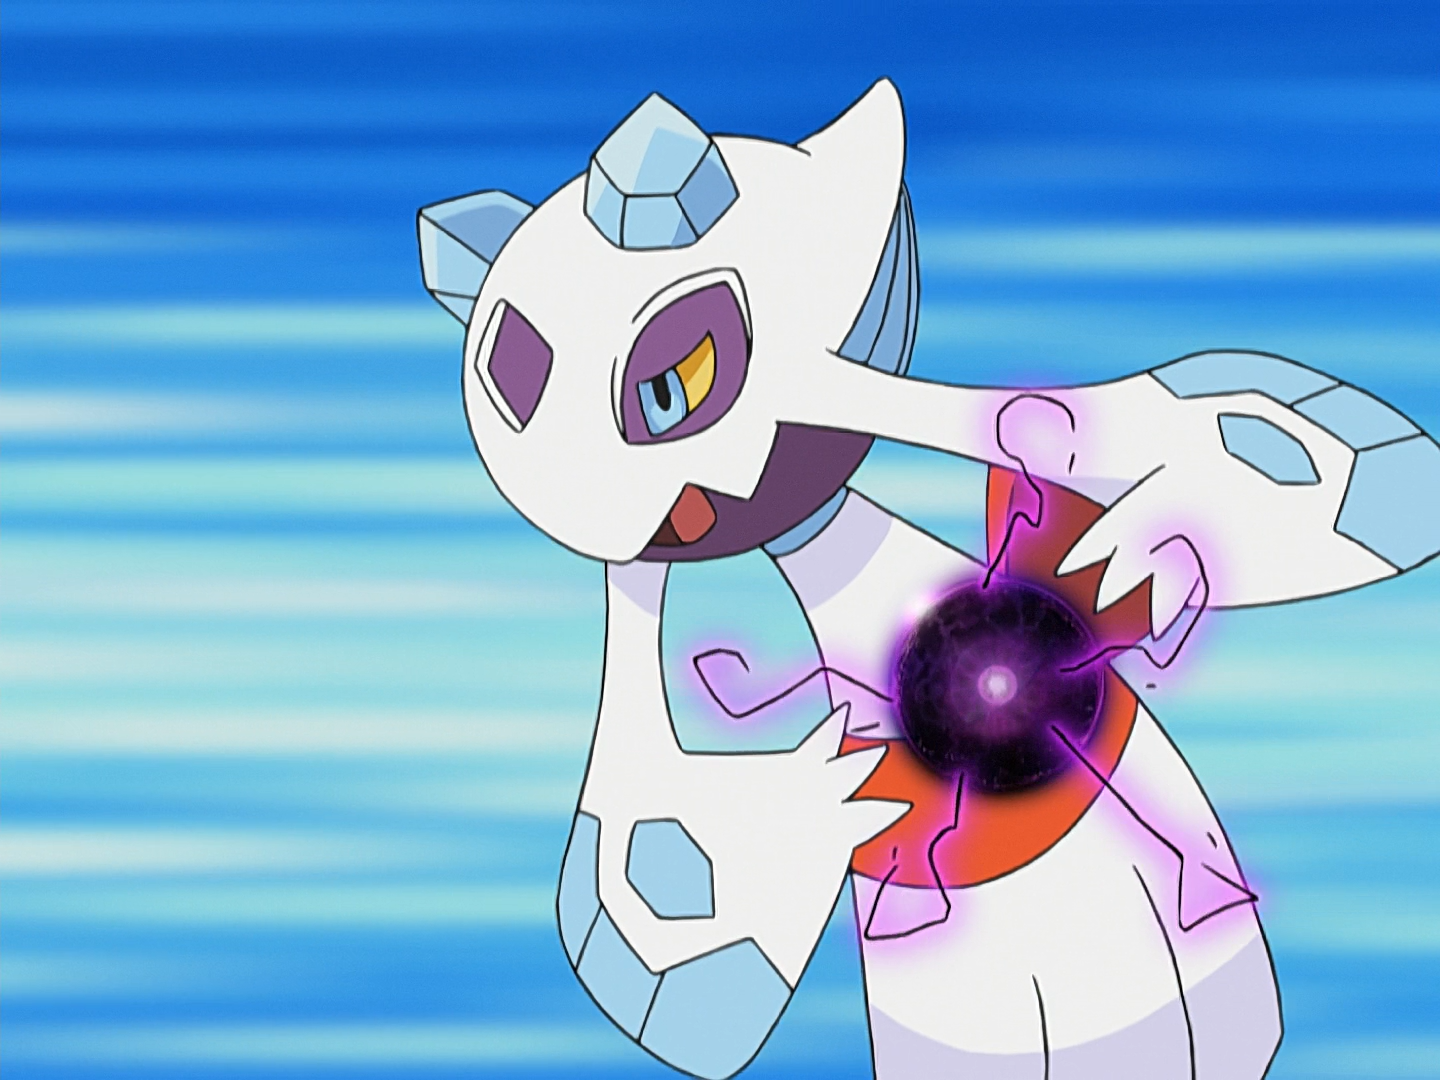 A quasi-humanoid pokemon with wing-like arms and icy horns collects shadowy energy for an attack. She is white, blue, and purple, befitting a ghost with ice powers.